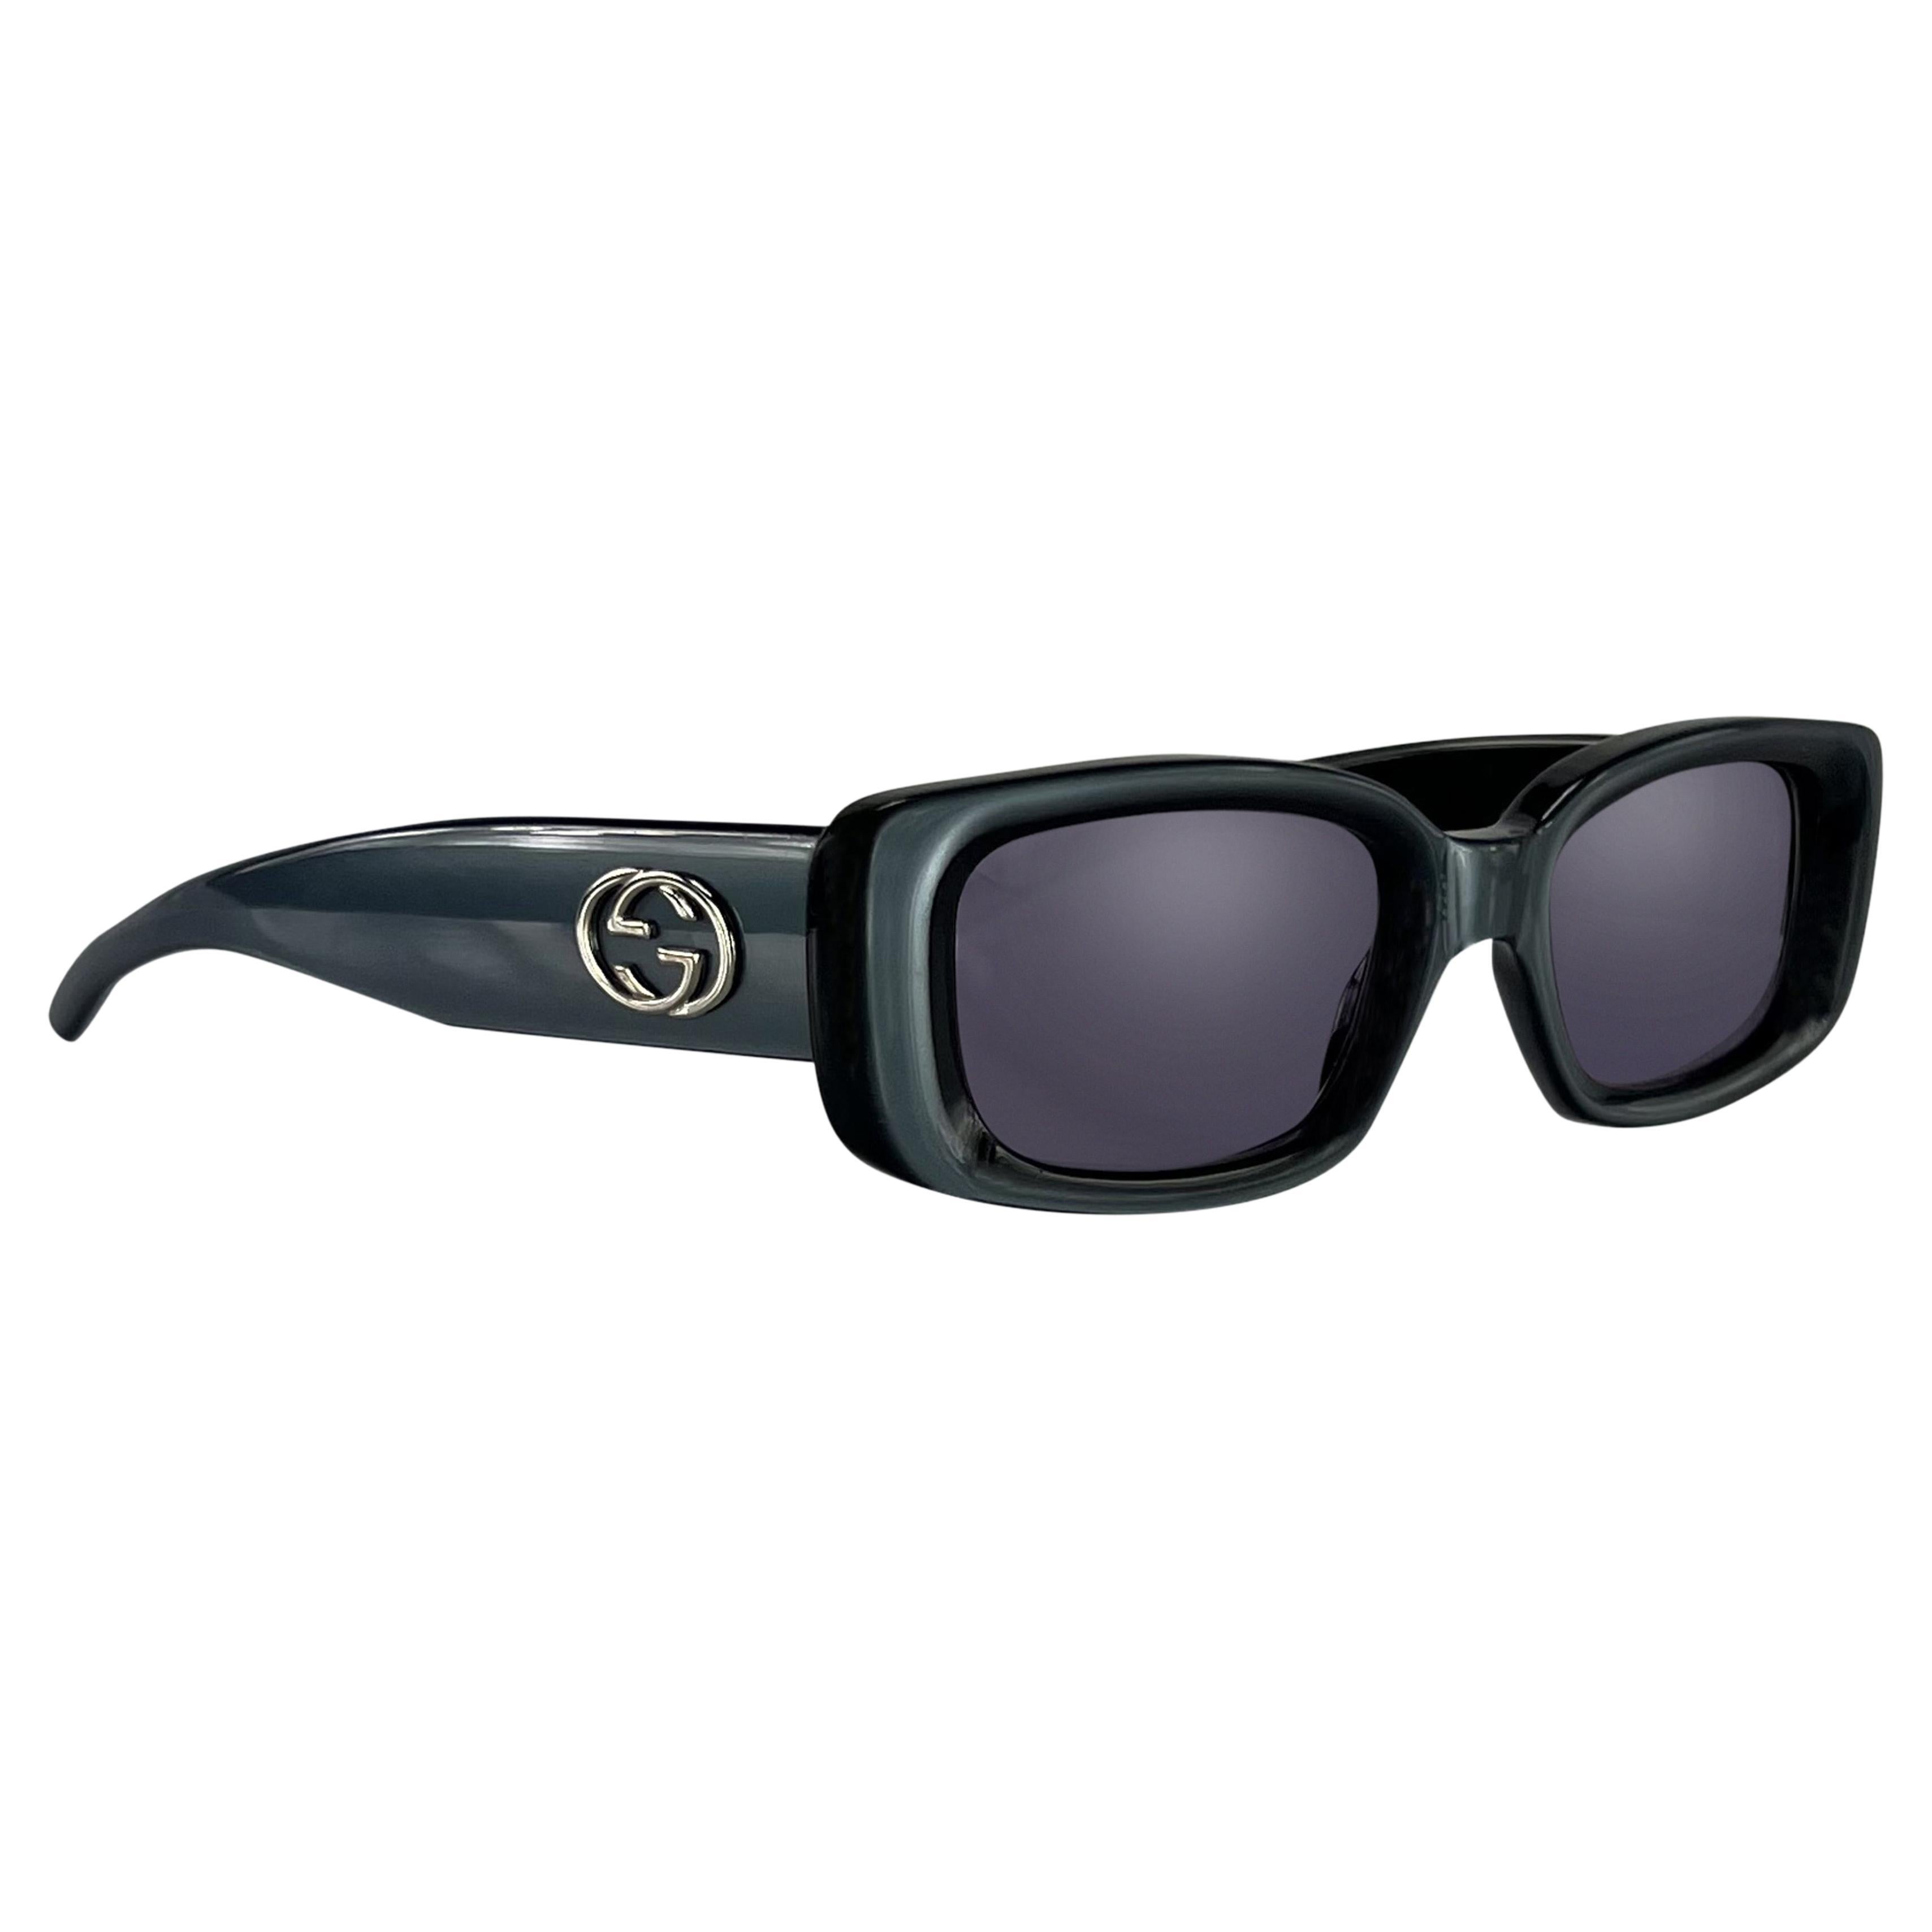 S/S 1997 Gucci by Tom Ford Ad Blue Metallic GG Logo Rectangular Sunglasses For Sale